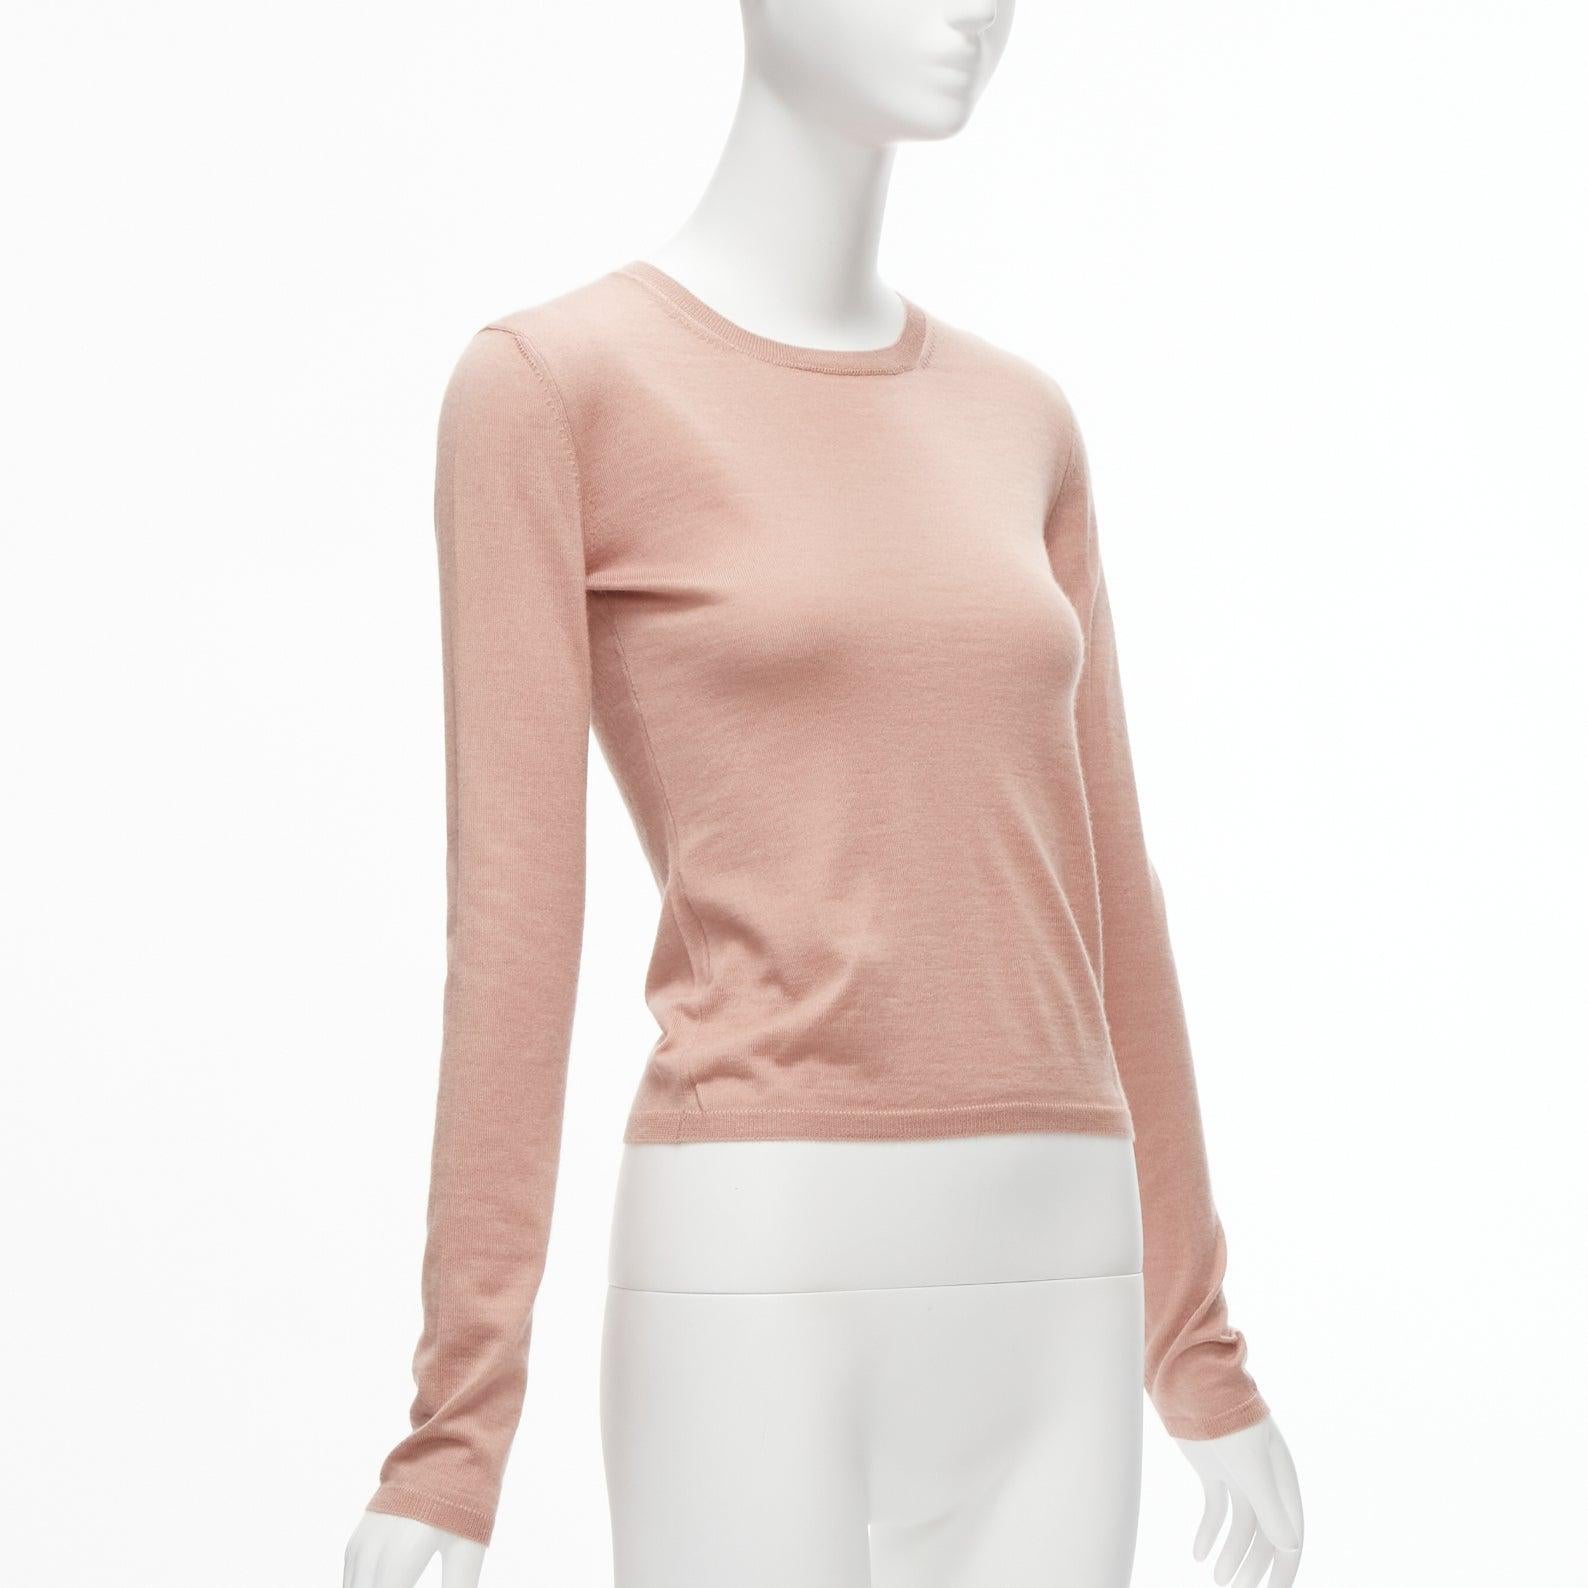 MIU MIU blush pink lux shine crew neck long sleeve knit sweater IT38 M
Reference: SNKO/A00242
Brand: Miu Miu
Designer: Miuccia Prada
Material: Feels like wool
Color: Pink
Pattern: Solid
Closure: Pullover
Made in: Romania

CONDITION:
Condition: